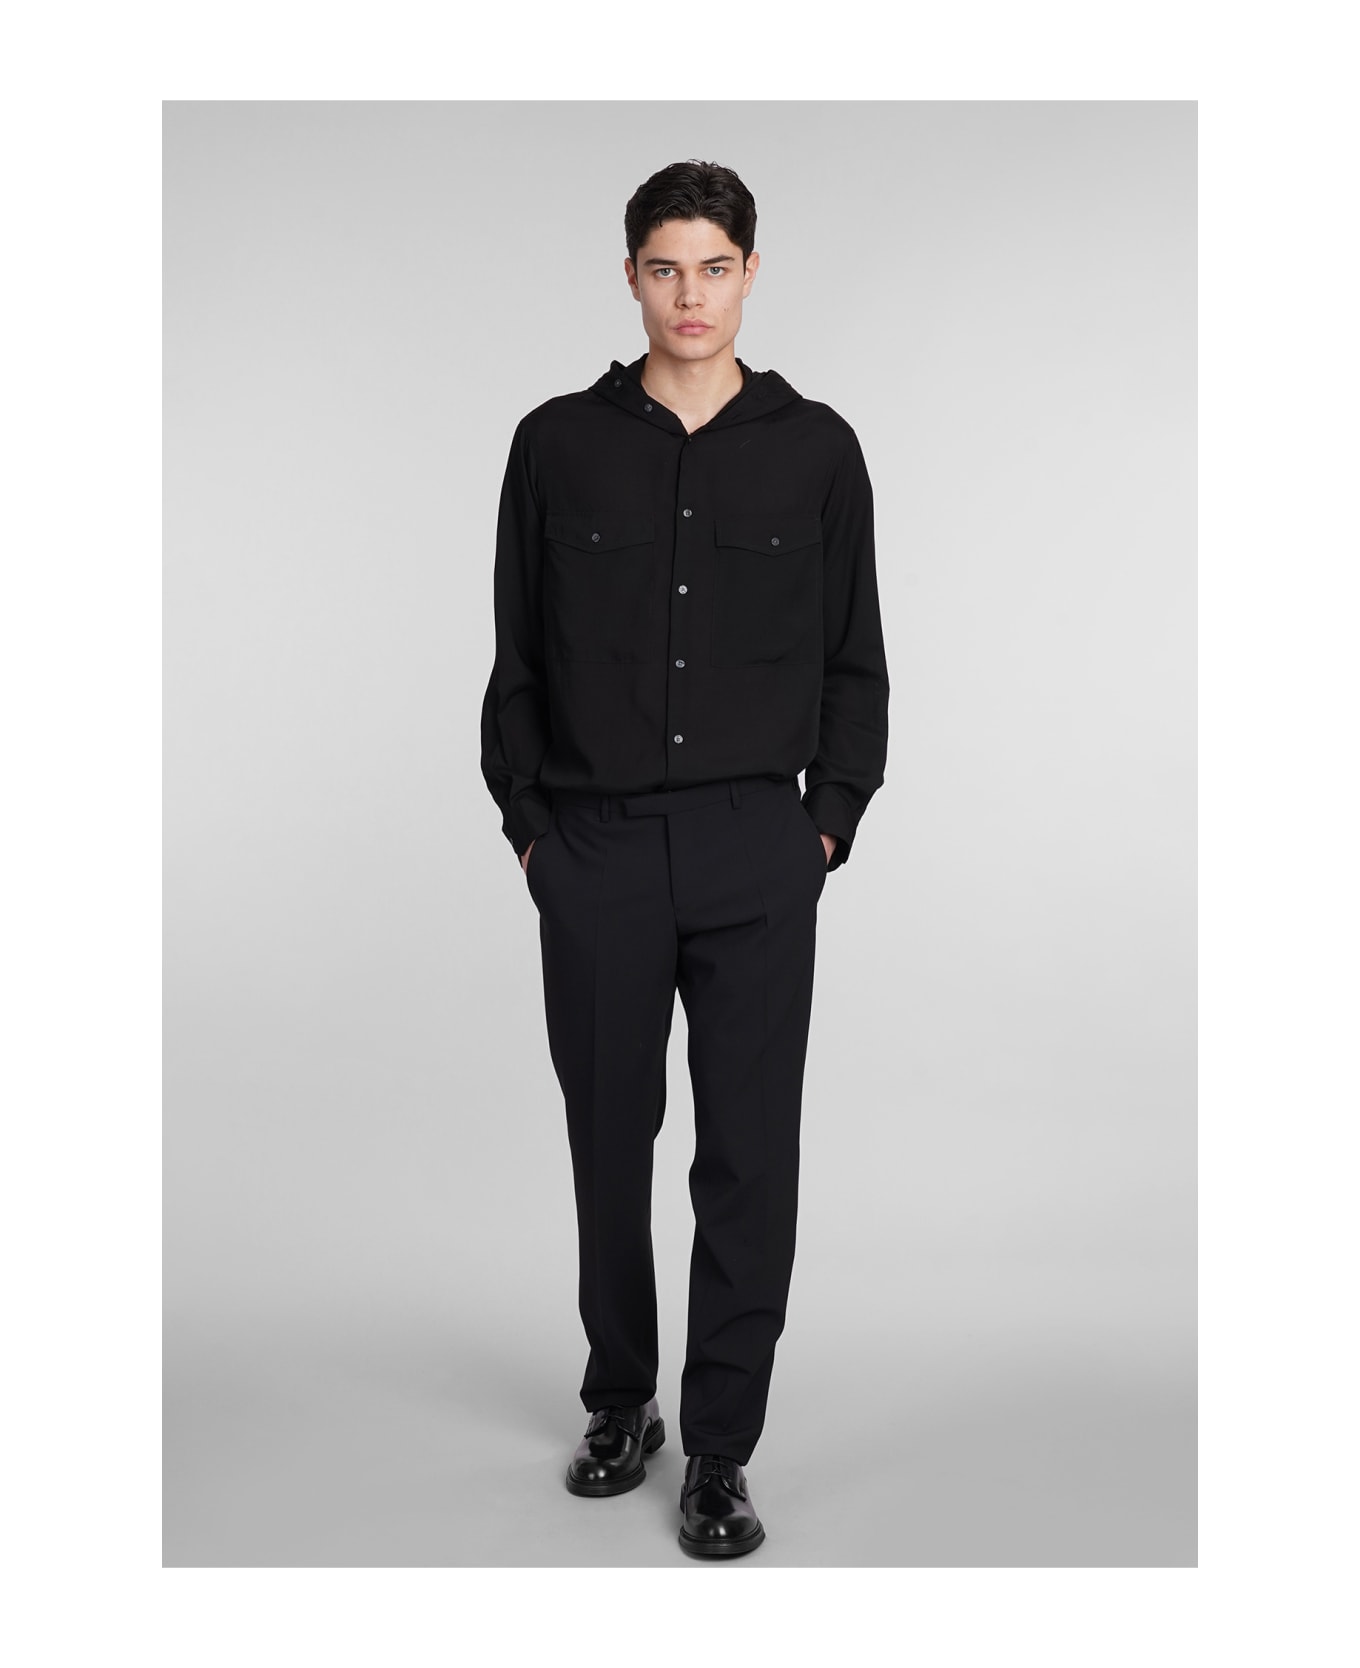 Emporio Armani Shirt In Black Wool And Polyester - black